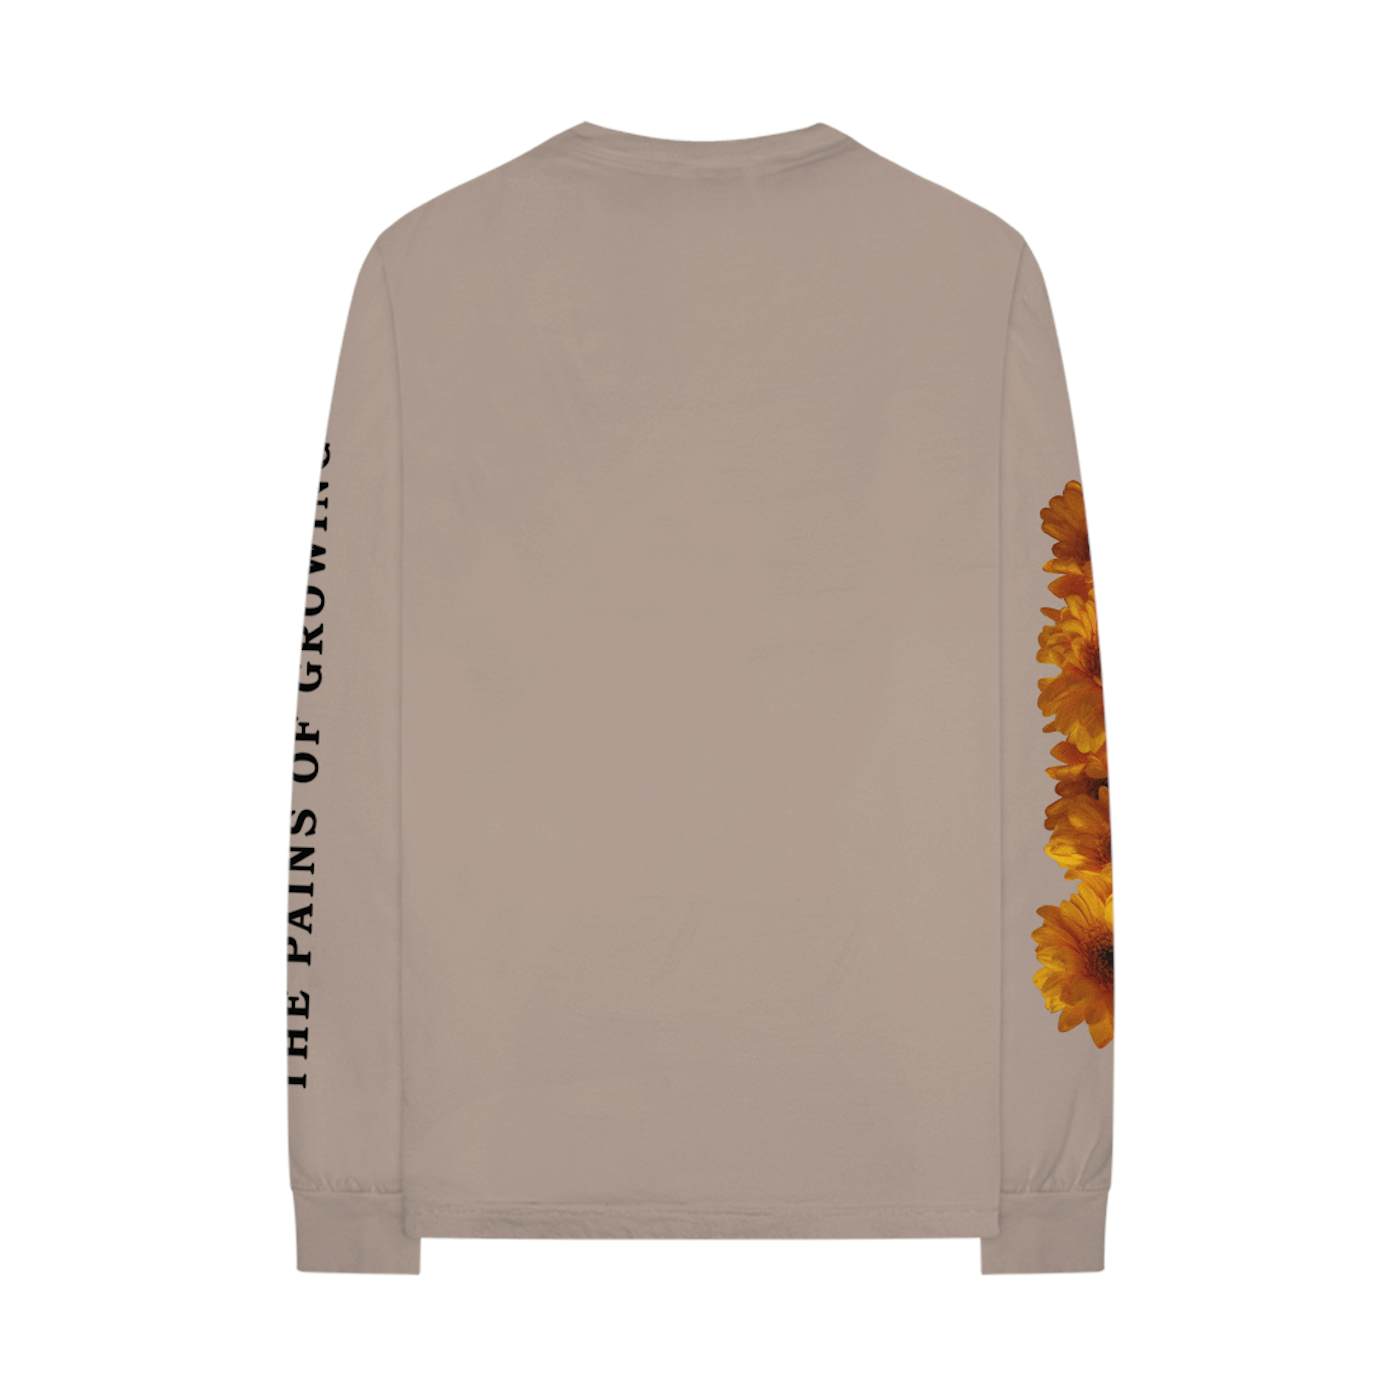 Alessia Cara 'The Pains Of Growing' L/S